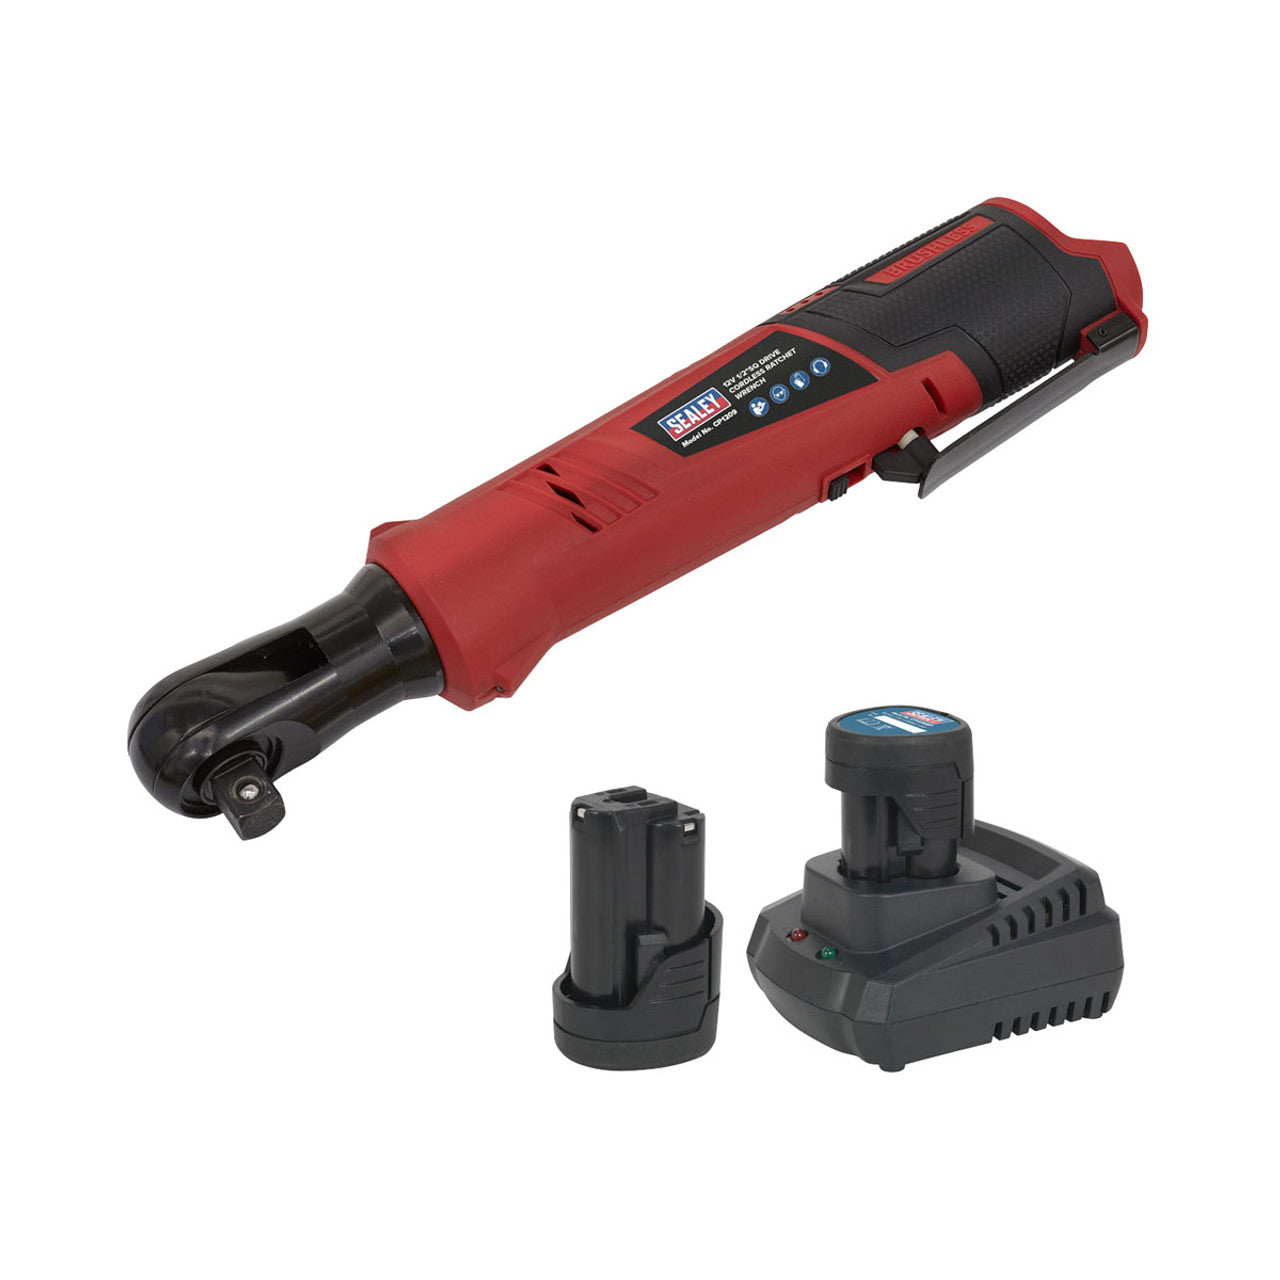 Sealey CP1209KIT 12V SV12 Series 1/2"Sq Drive Cordless Ratchet Wrench Kit with 2 Batteries